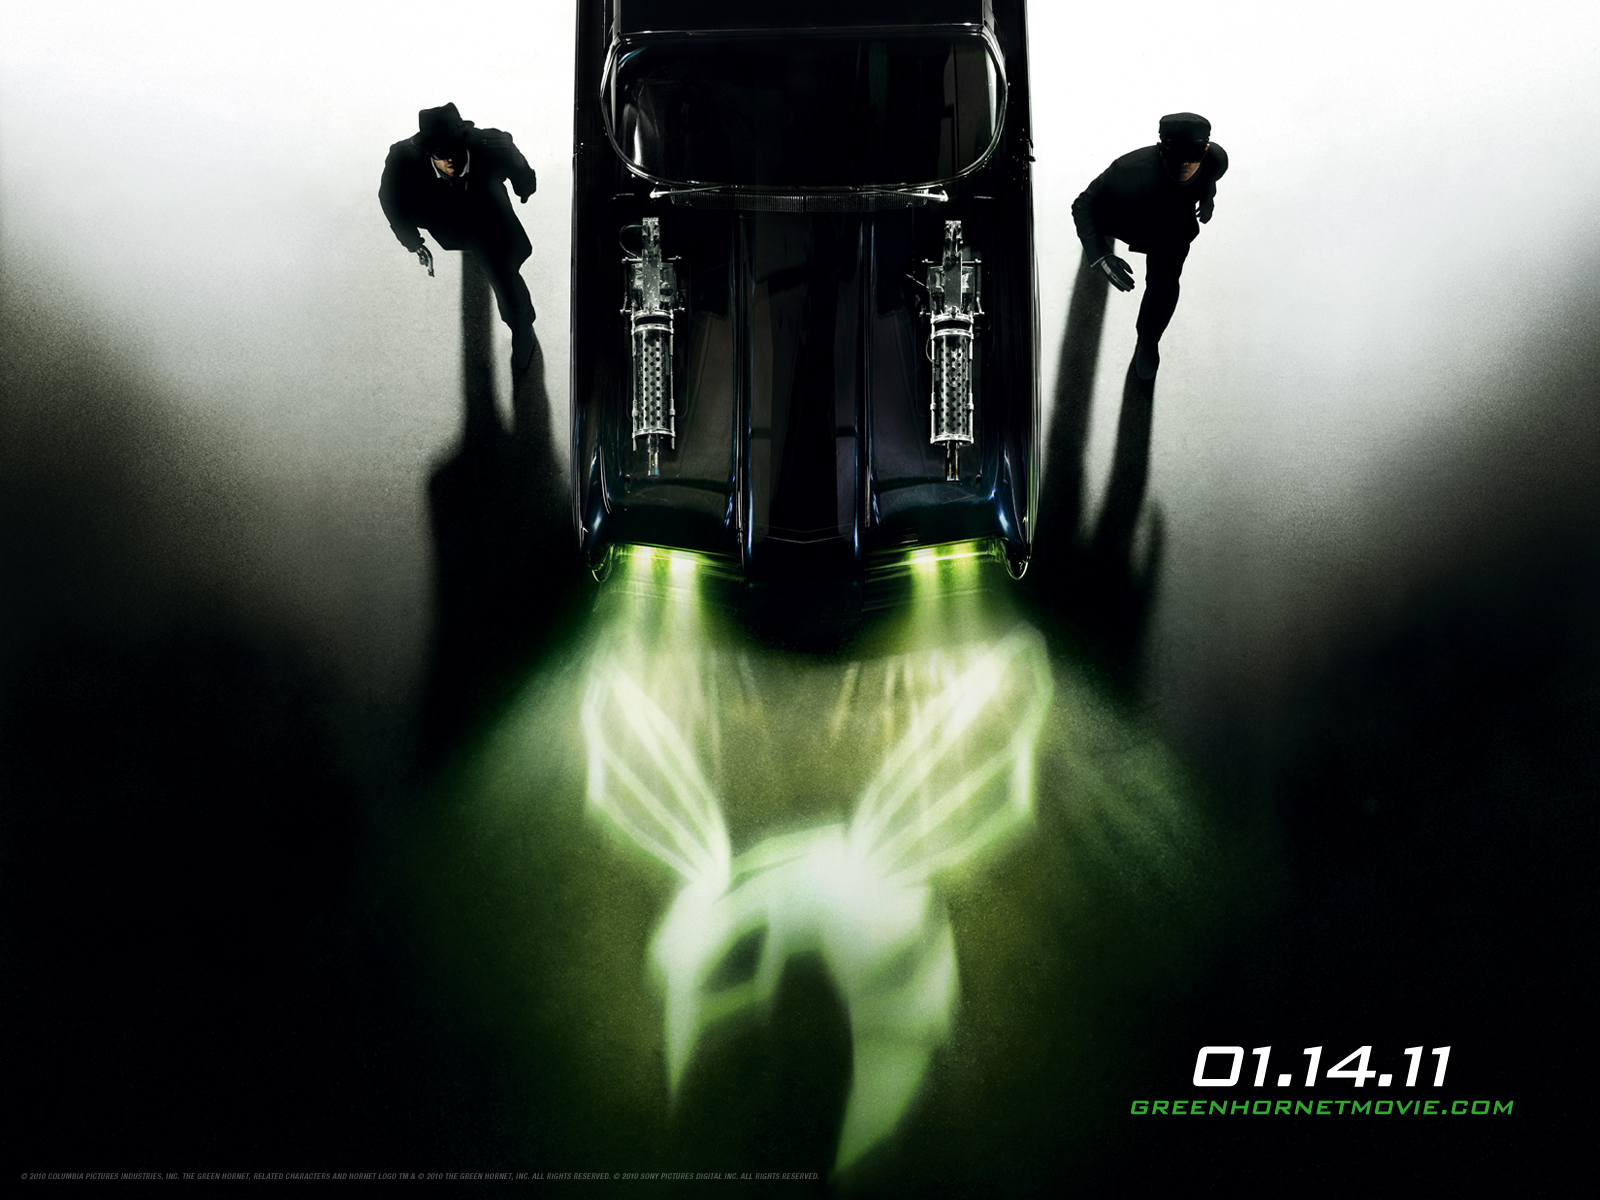 Download full size The Green Hornet wallpaper / Movies / 1600x1200